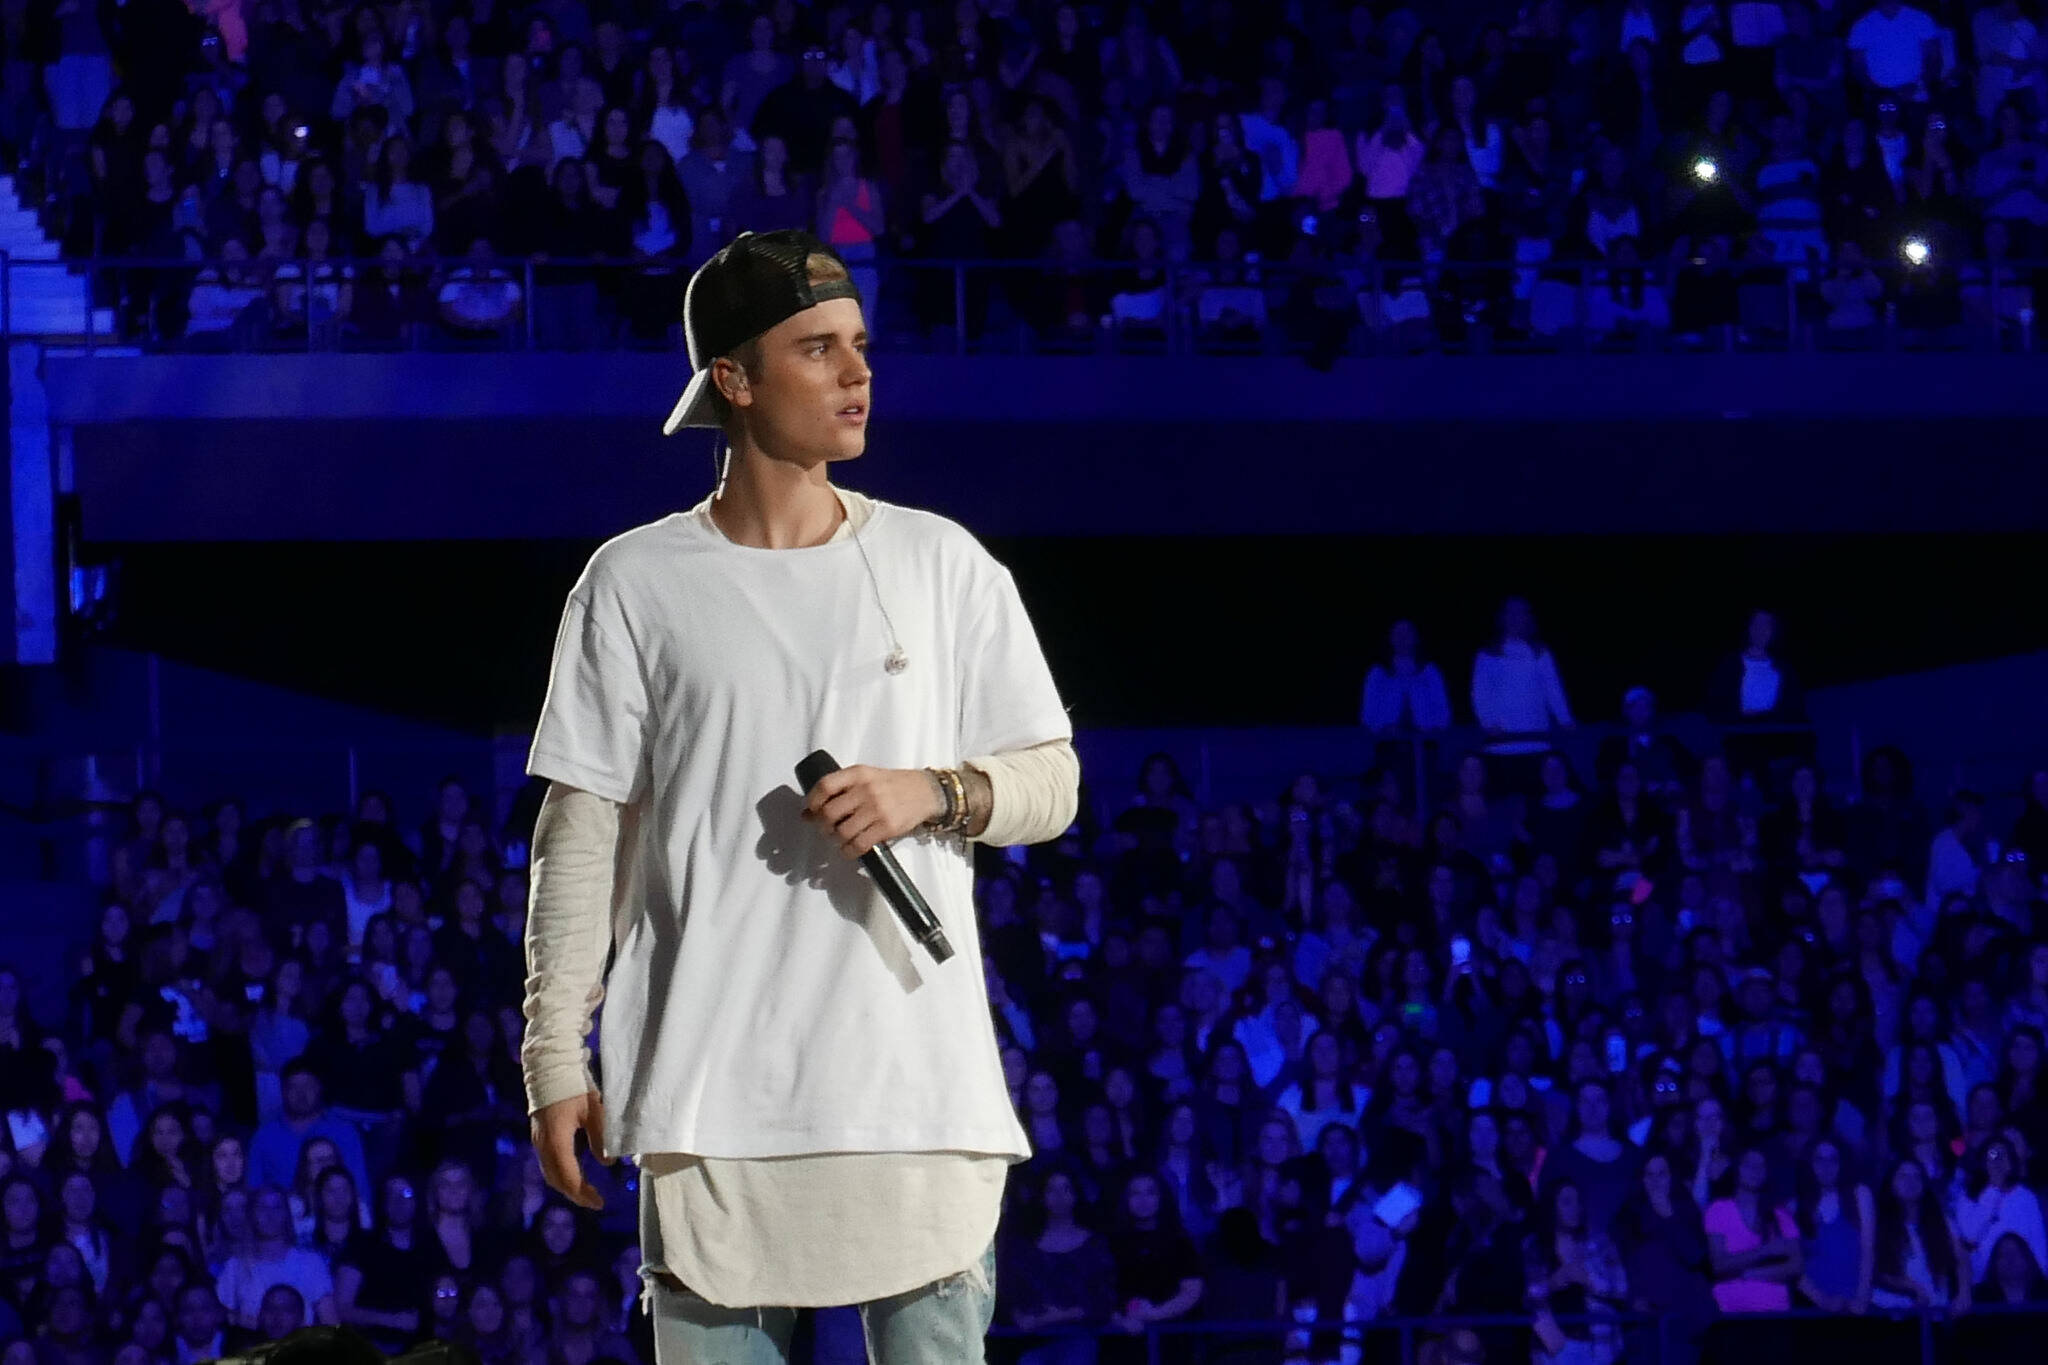 Justin Bieber cancels Toronto concerts and entire world tour